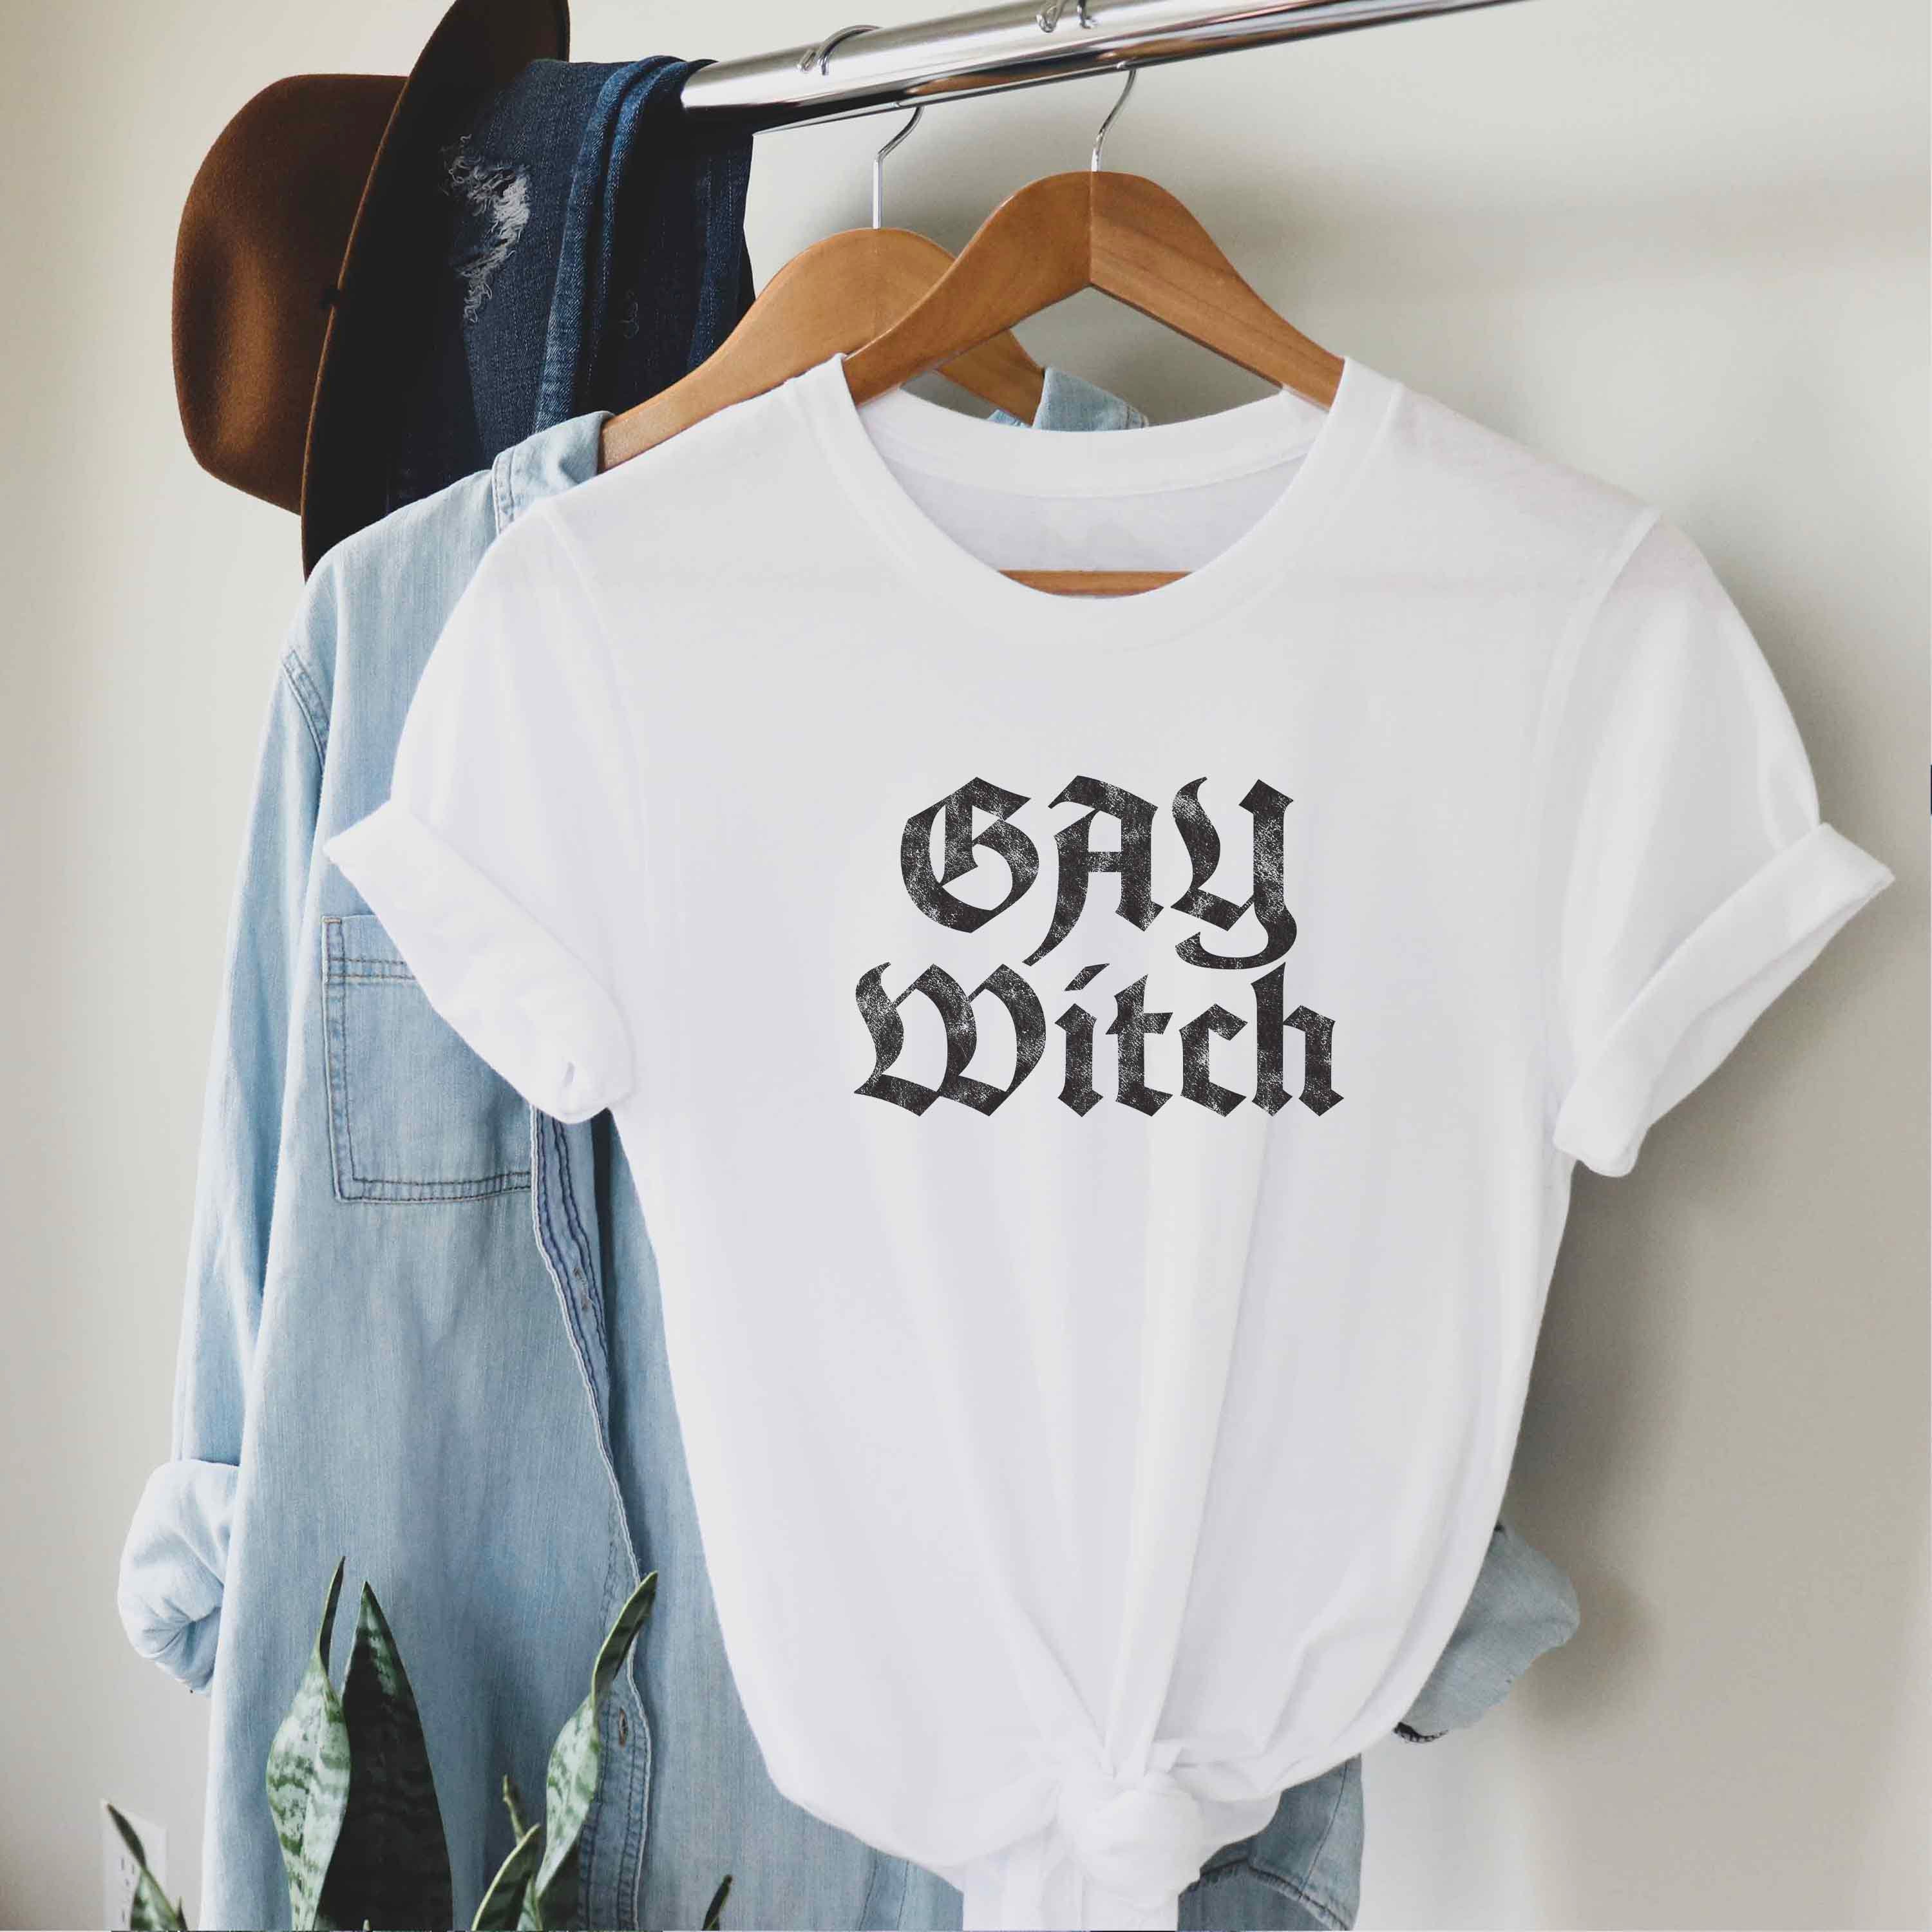 Discover Gay Witch Funny Halloween Shirt, Gay Pride Shirt, Queer Spooky Shirt, LGBTQ Gay Pride Halloween Witch Shirt, Gay Witch Goth Halloween Shirt